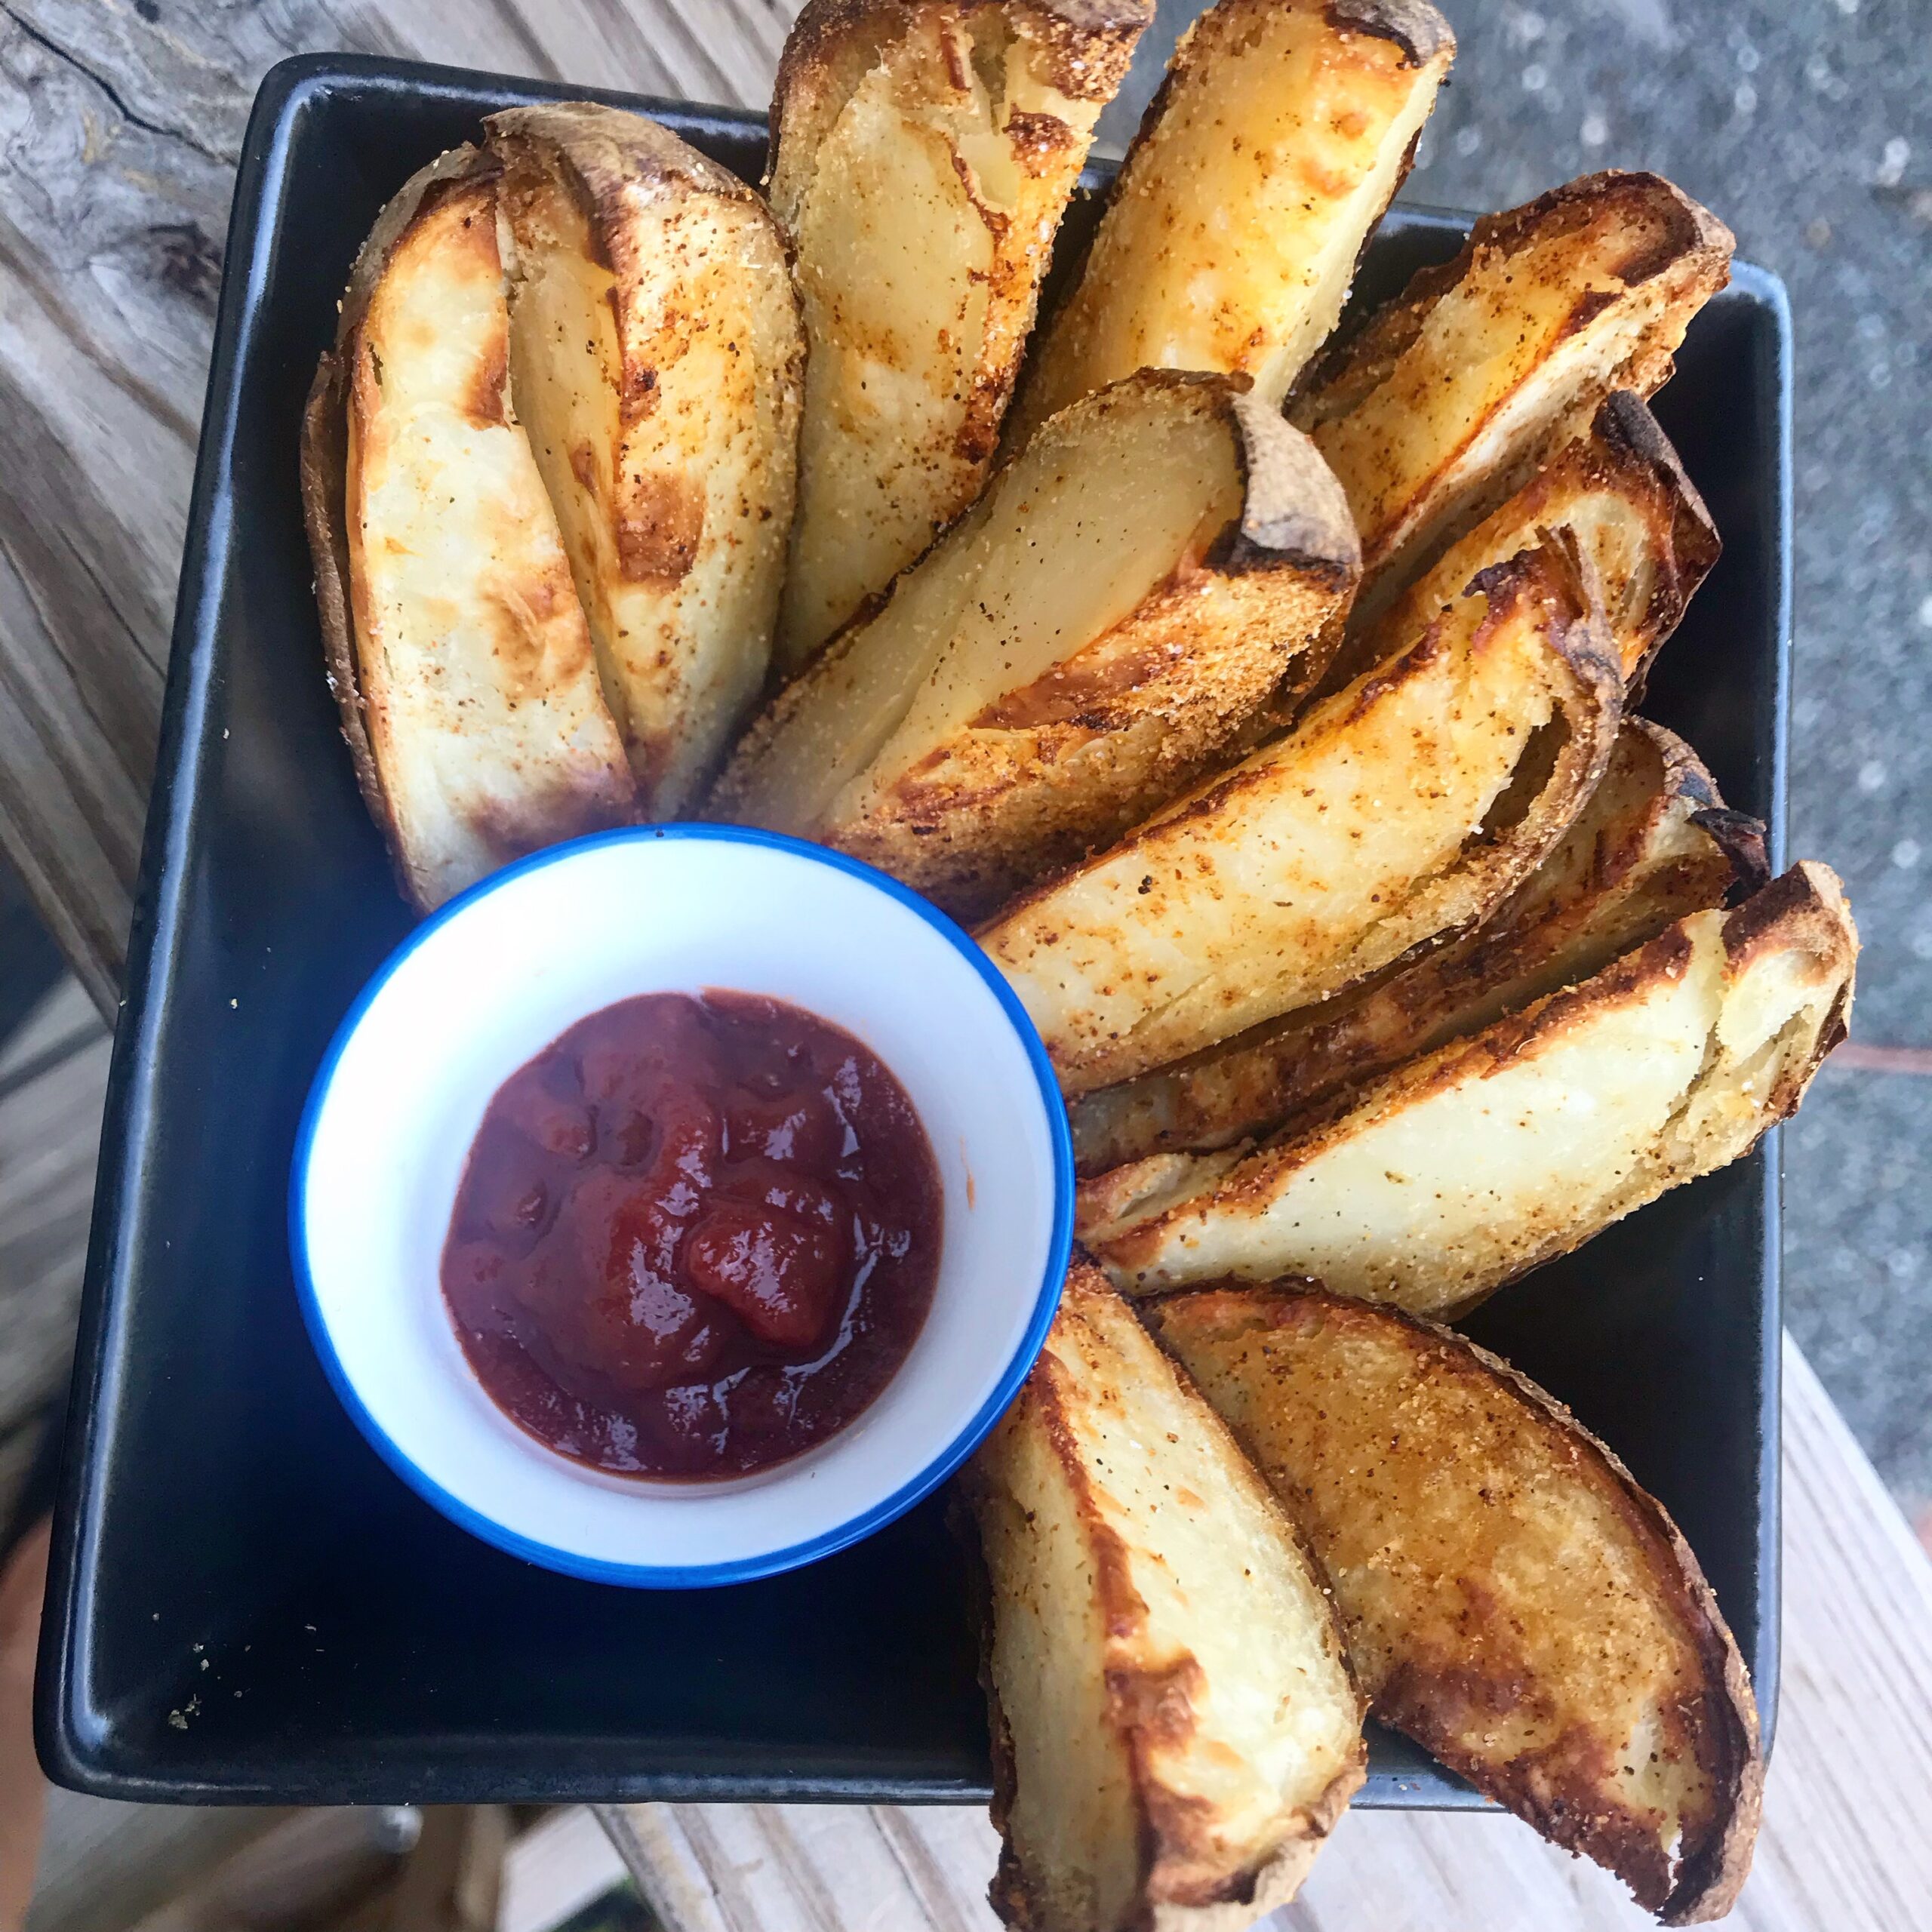 Baked Wedge Fries